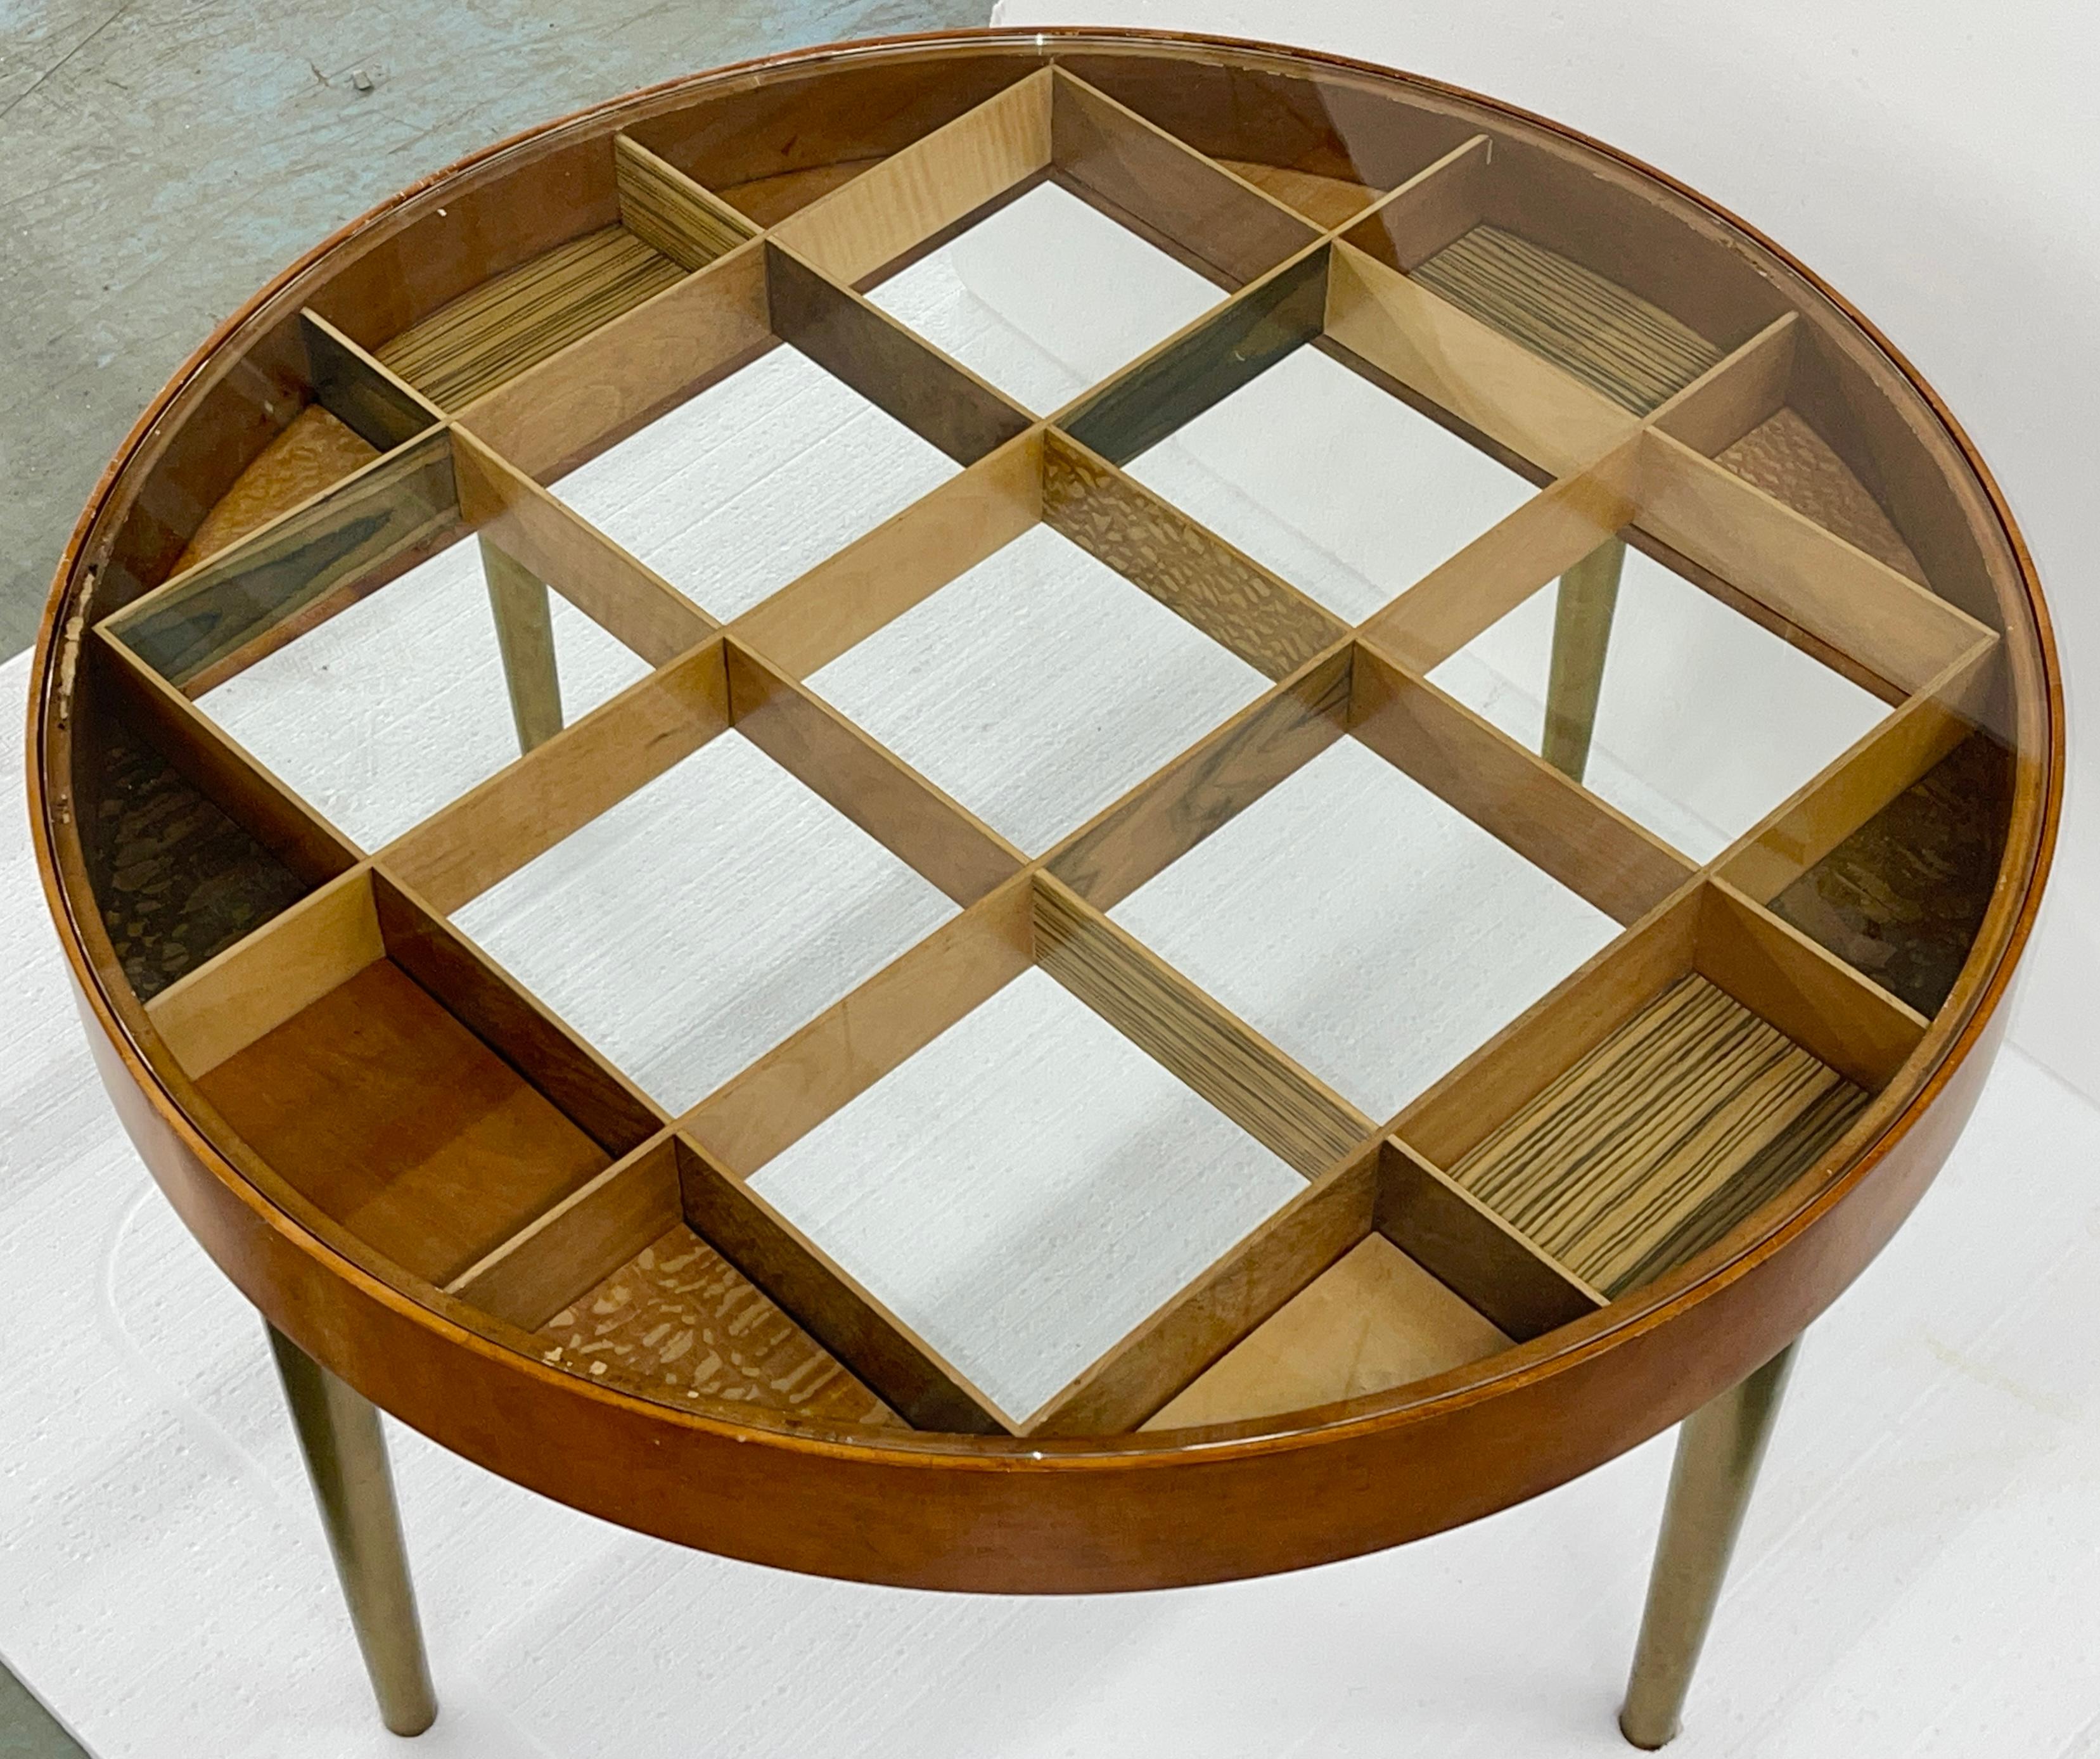 Mid-Century Modern Gio Ponti Style Round Cocktail Table by Keno Bros. For Sale